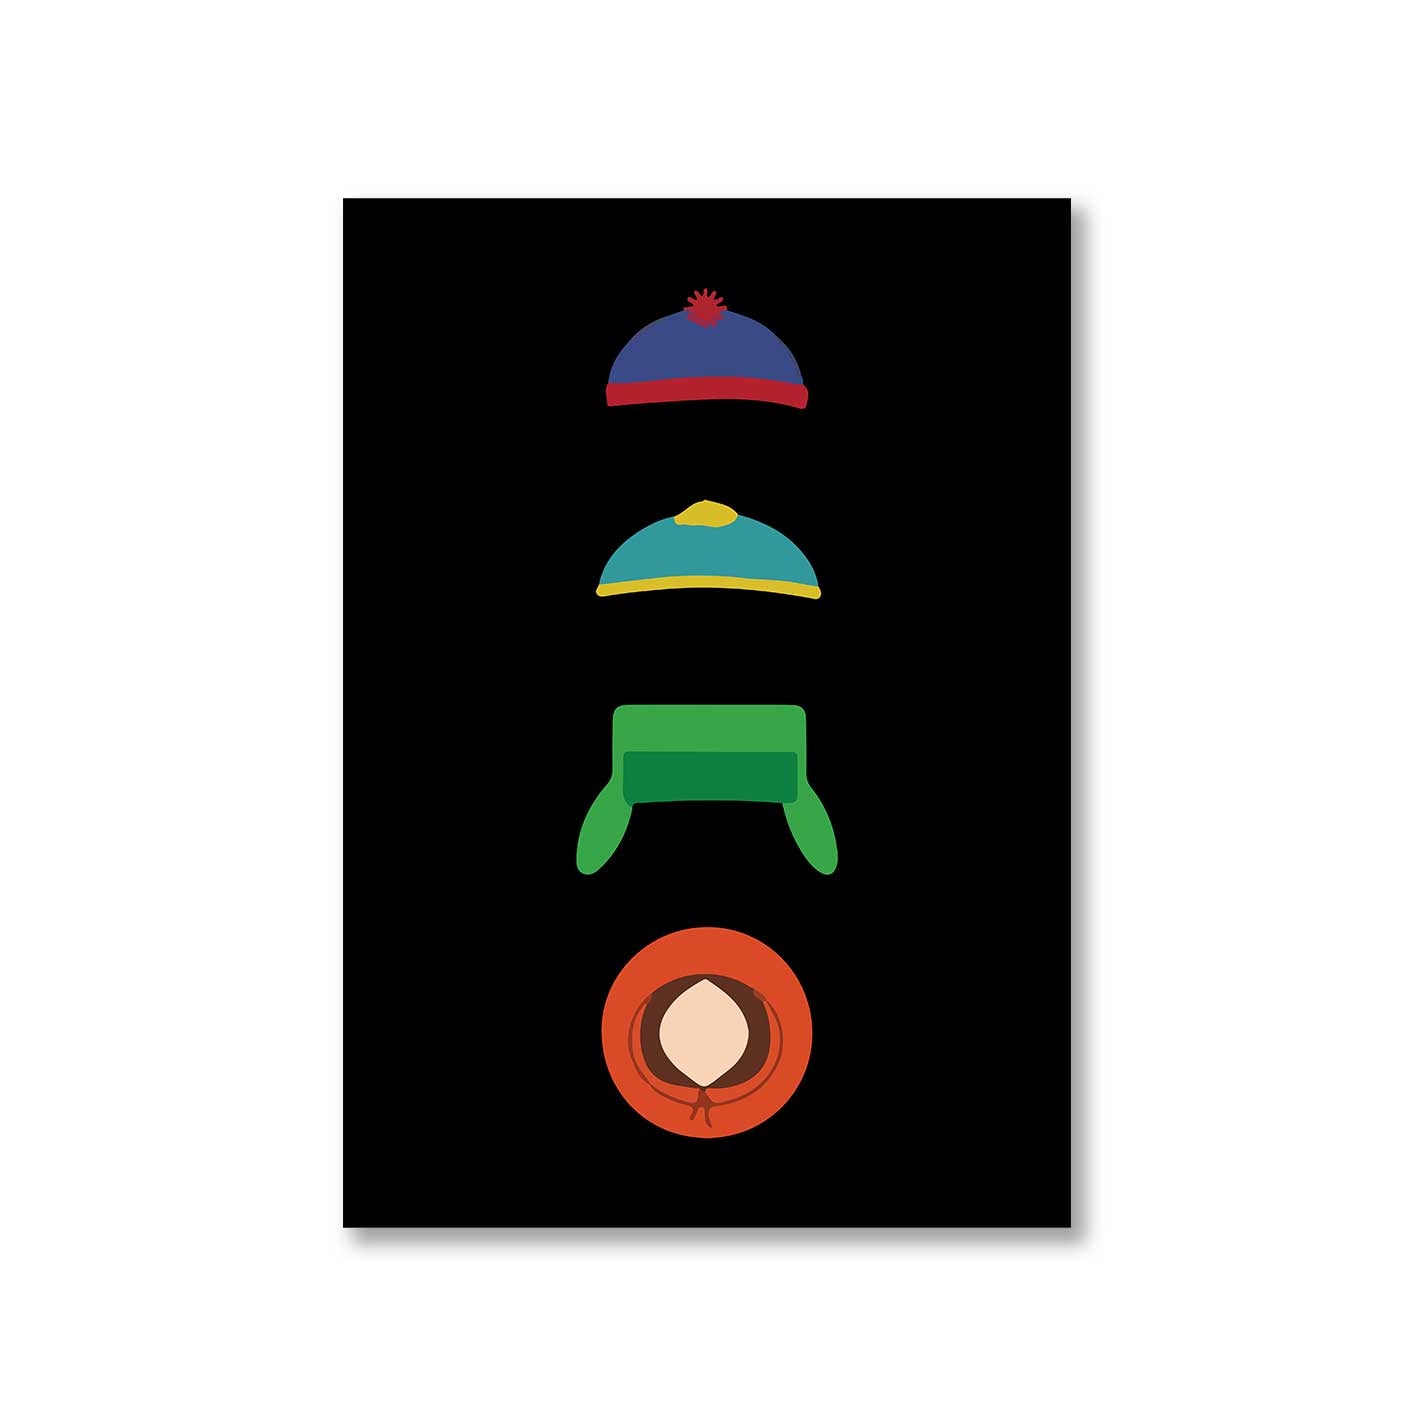 south park the hats poster wall art buy online india the banyan tee tbt a4 south park kenny cartman stan kyle cartoon character illustration